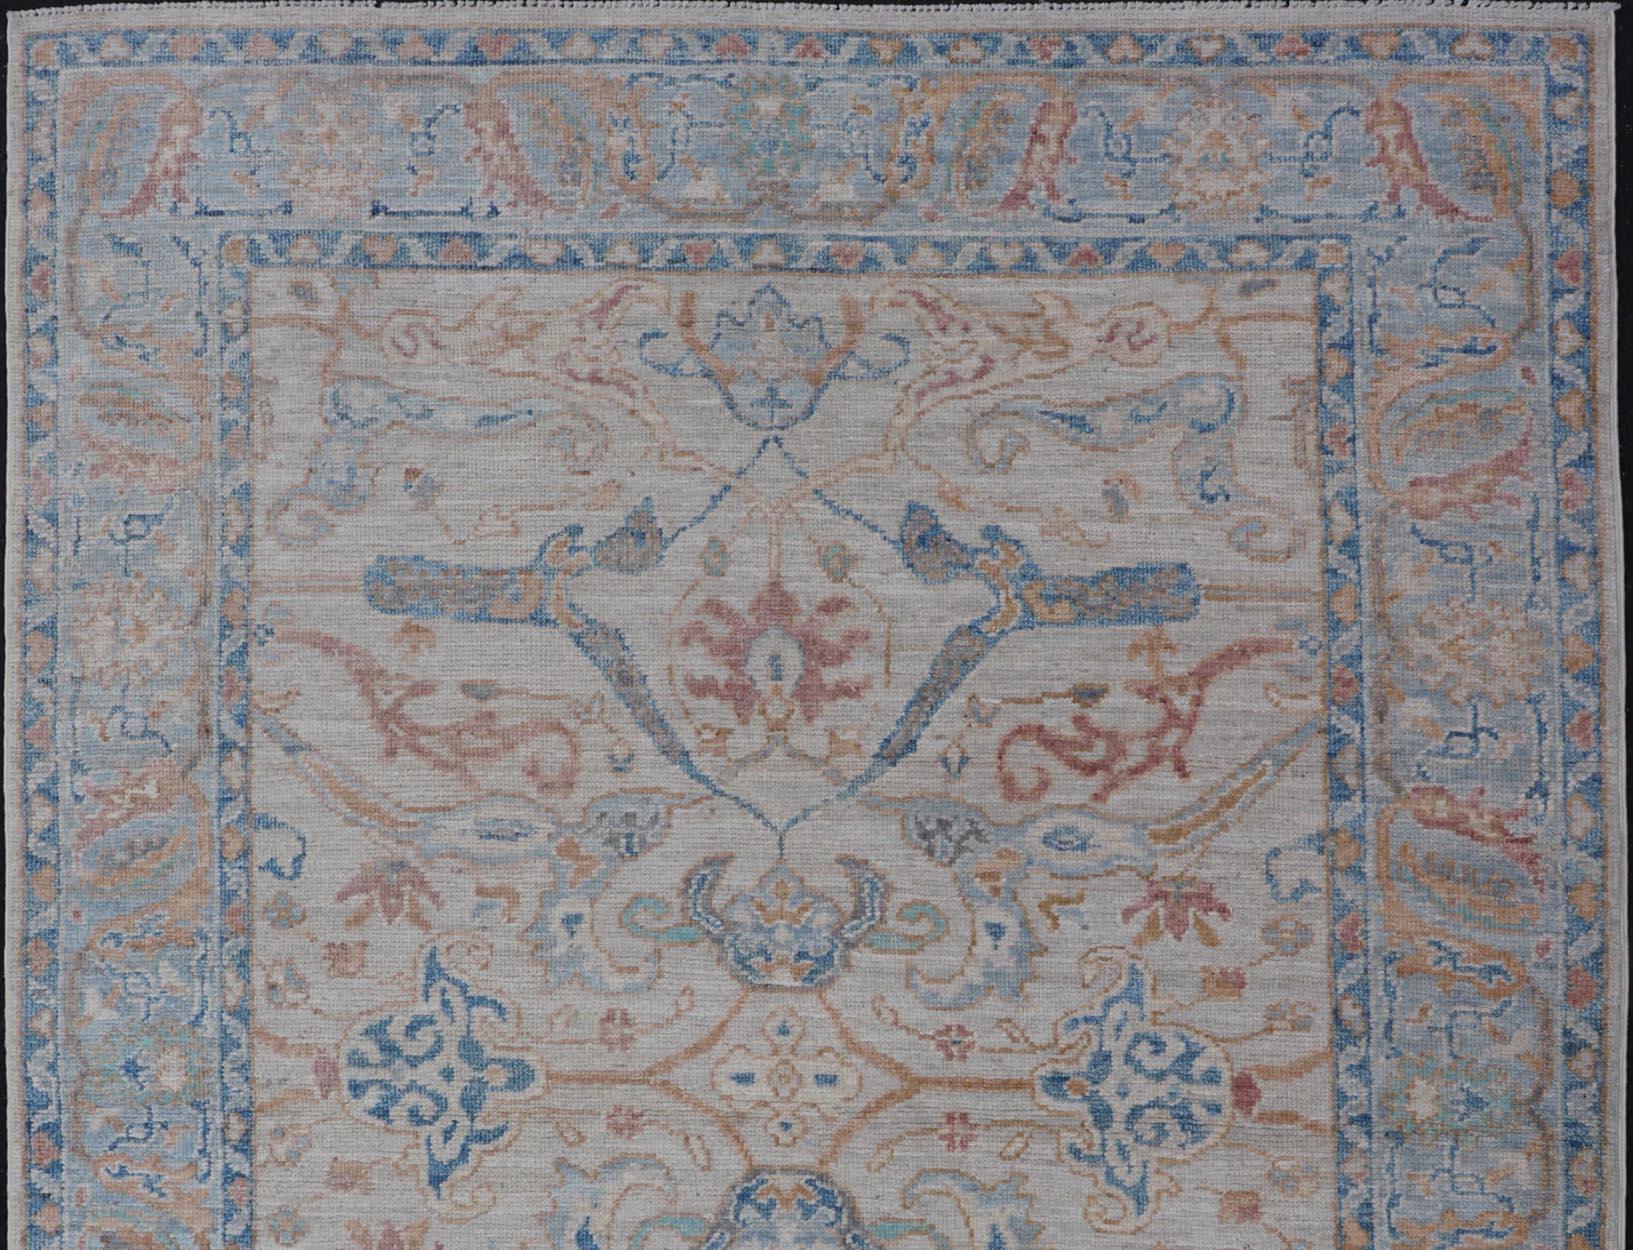 Arabesque All-Over Hand Knotted Oushak Designed in Ivory and Blue Tones In New Condition For Sale In Atlanta, GA